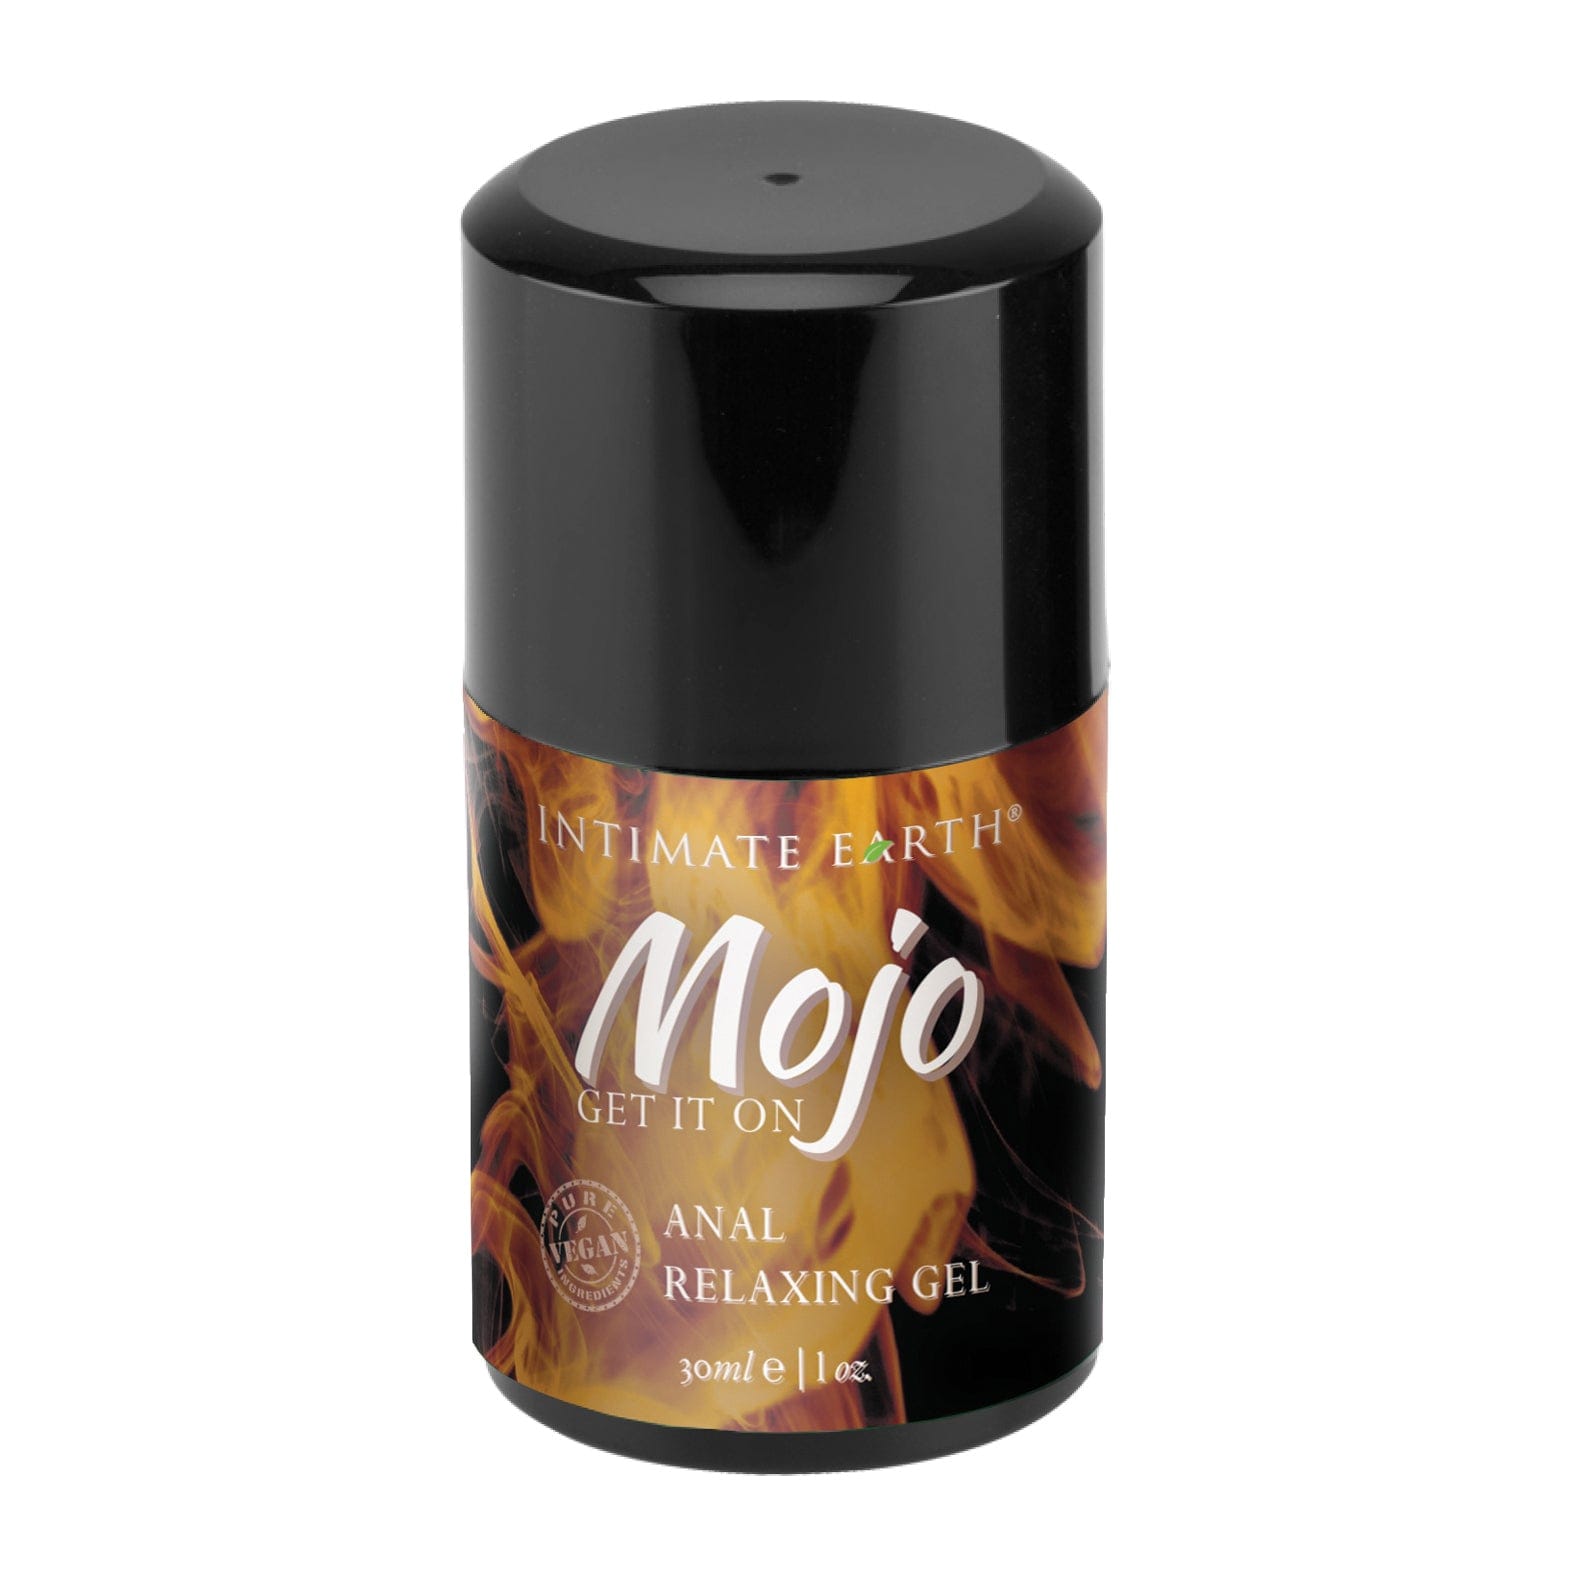 Intimate Earth - Mojo Get it On Anal Relaxing Gel 1 oz Anal Lube 850000918337 CherryAffairs